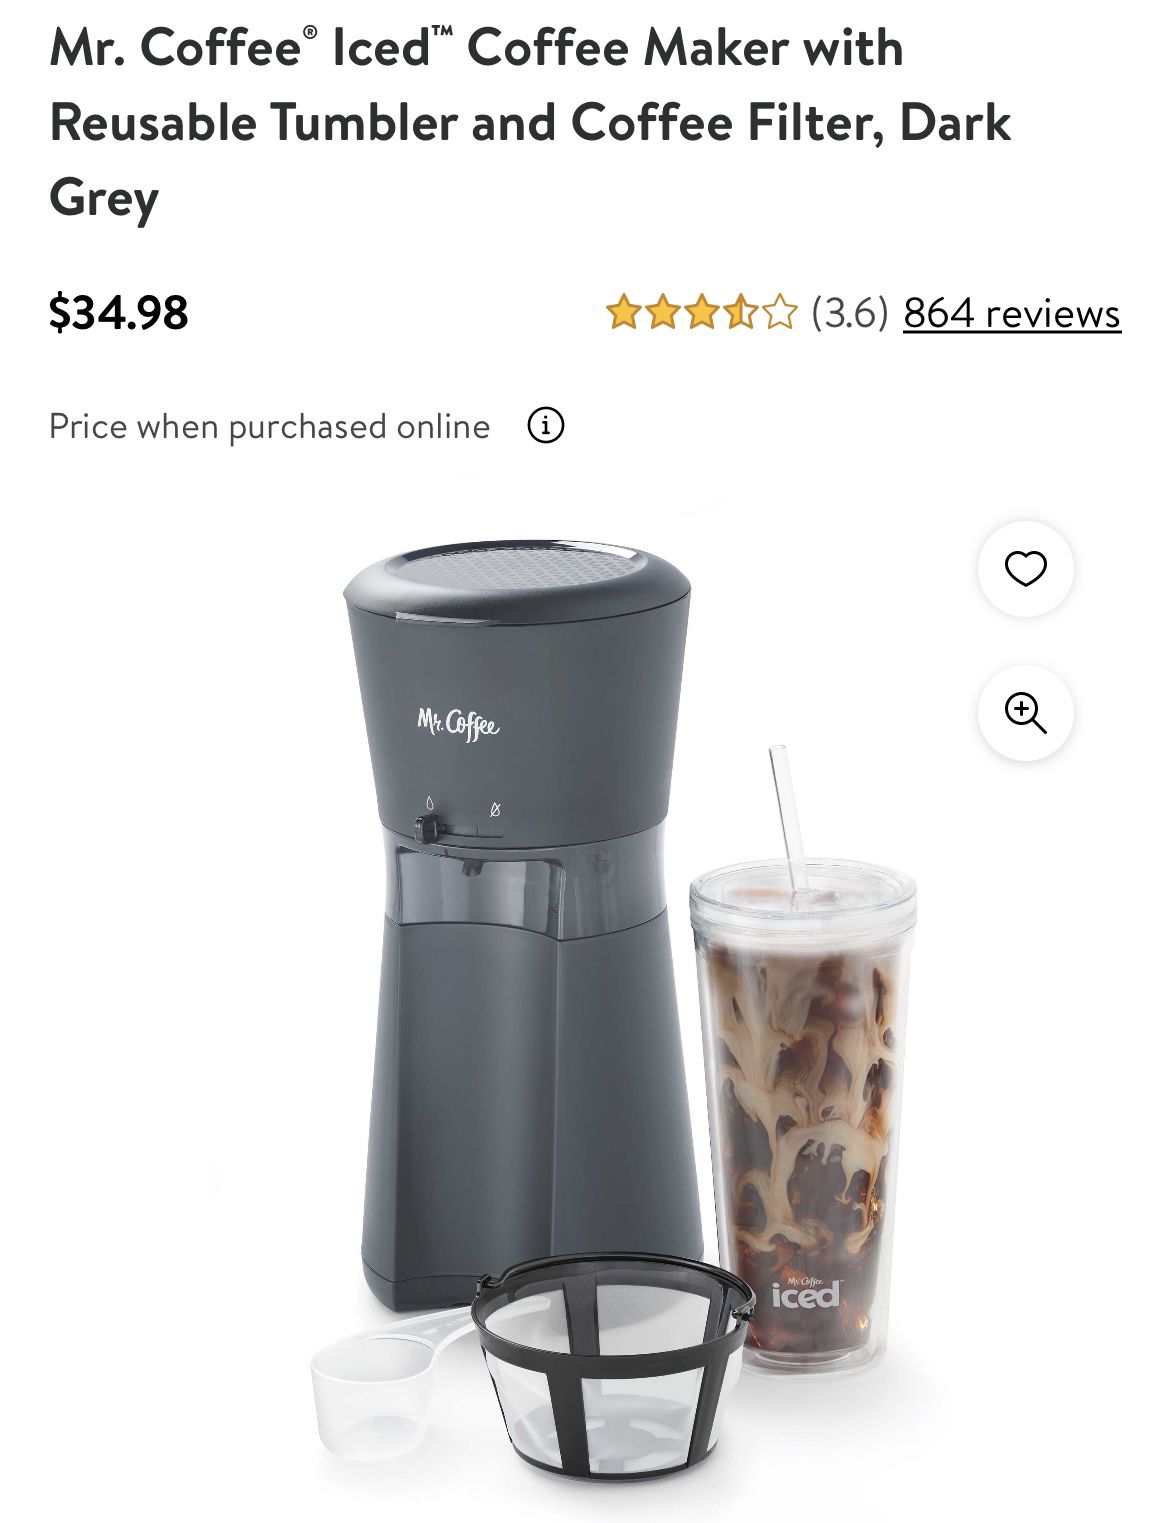 Mr. Coffee Iced Coffee Coffee Maker and Filter in Black